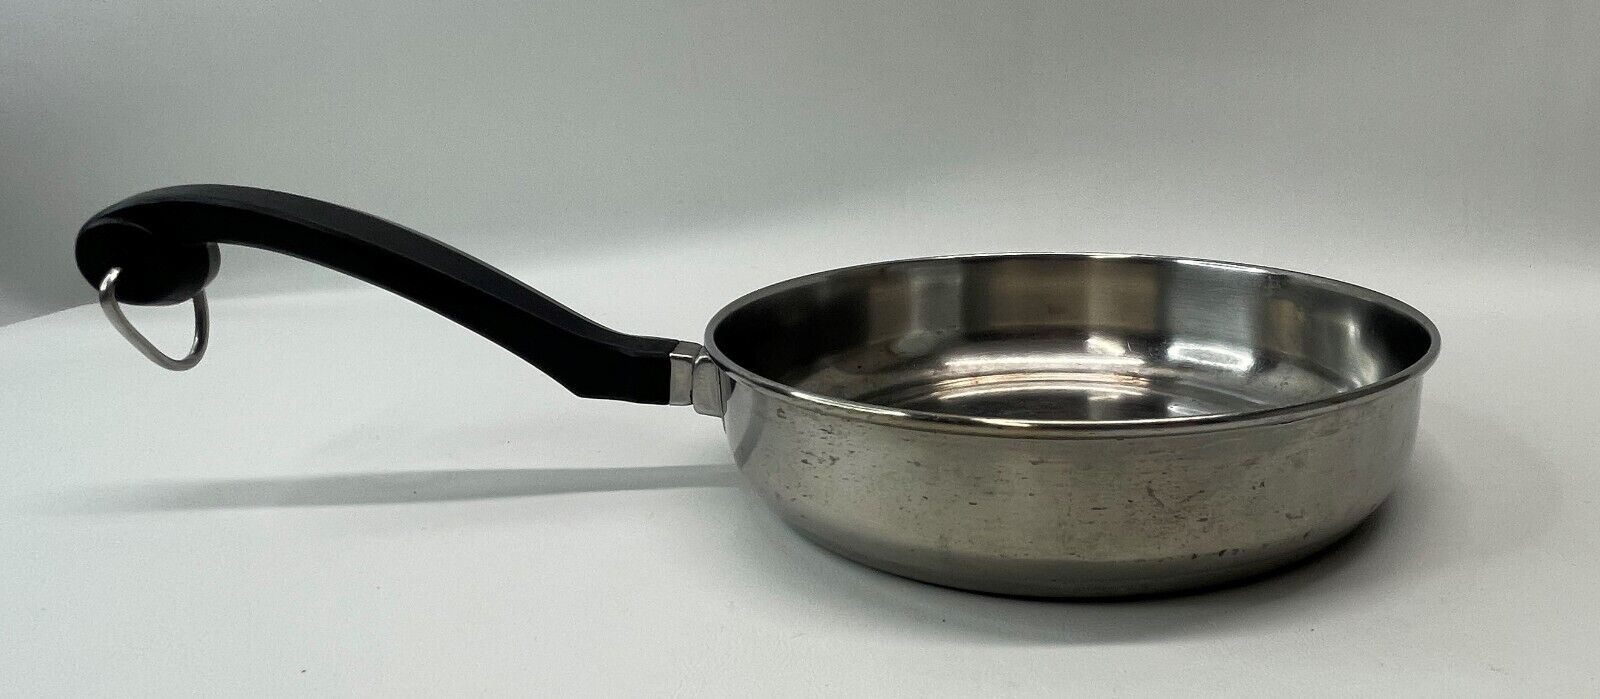 NYC USA Farberware 8” Inch Fry Pan Skillet Aluminum Clad Stainless Steel No Lid